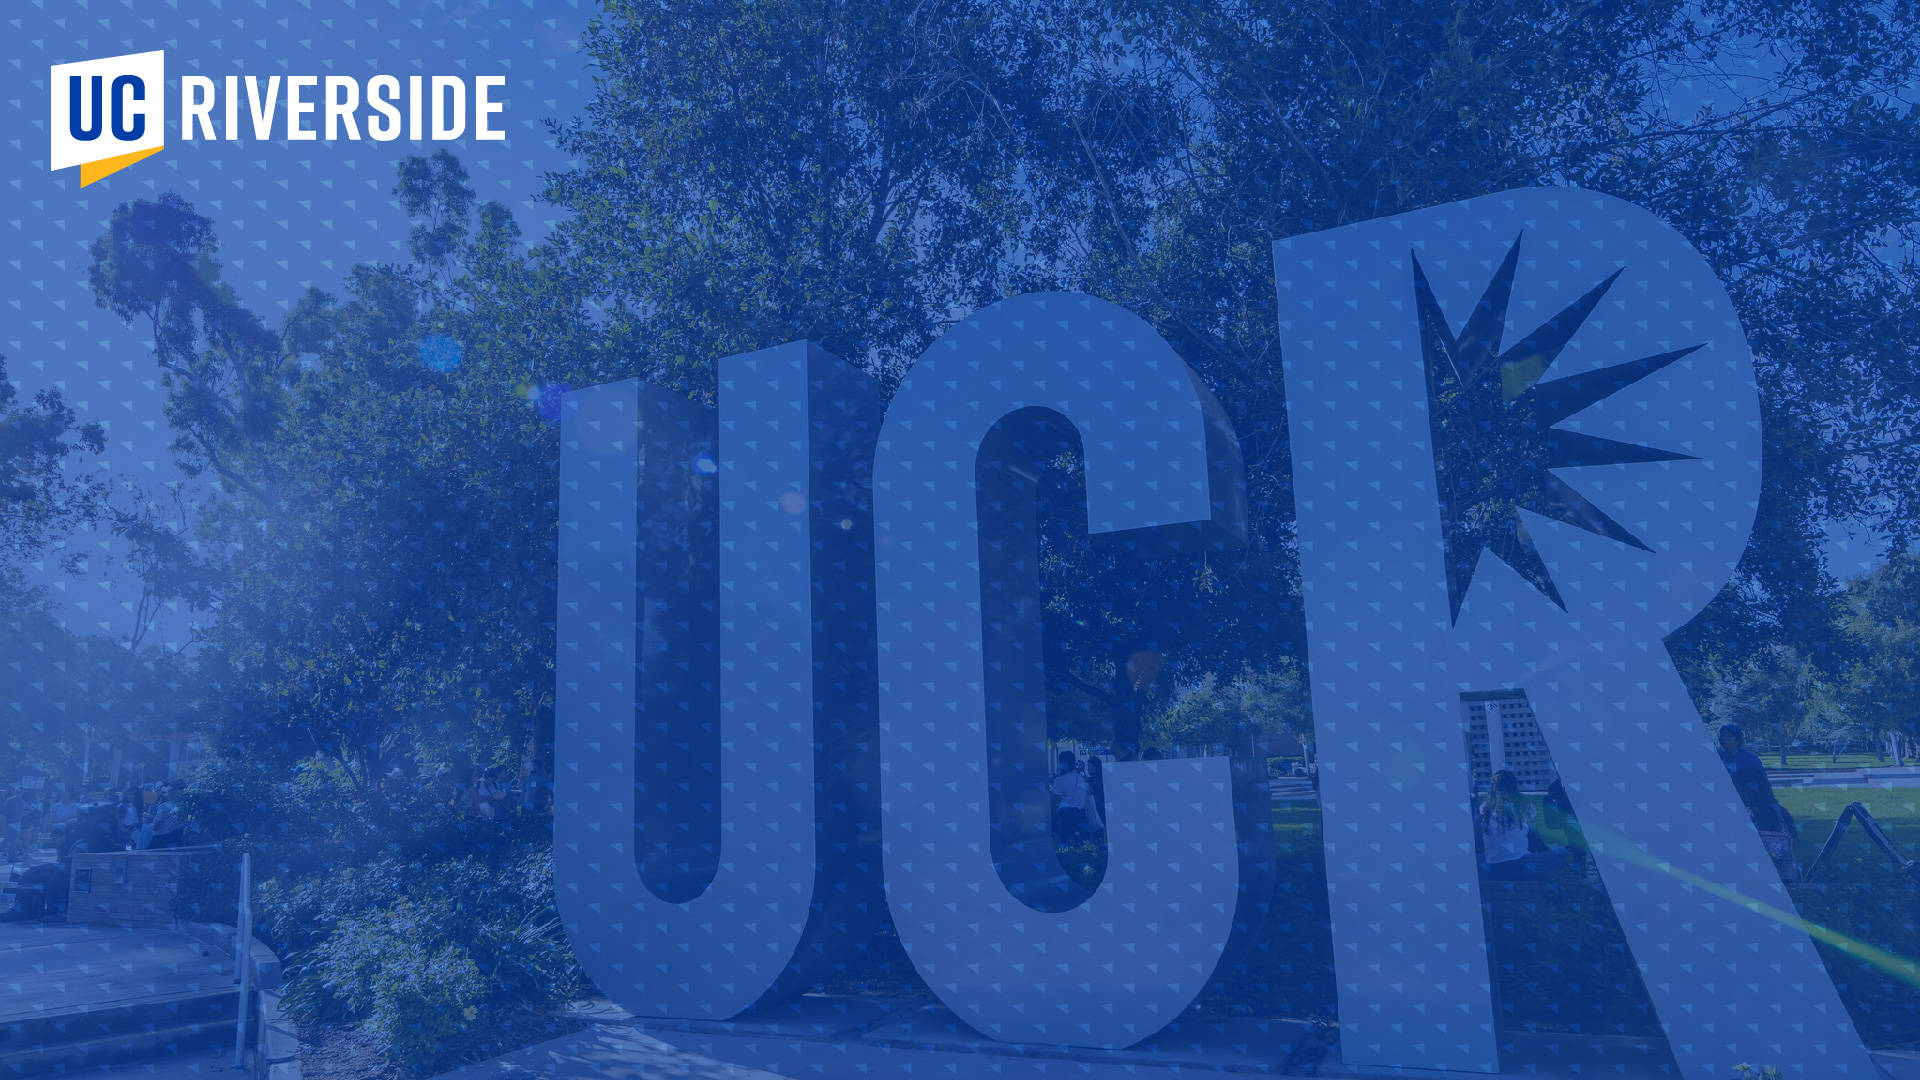 Ucr Campus Sign With Blue Filter Wallpaper